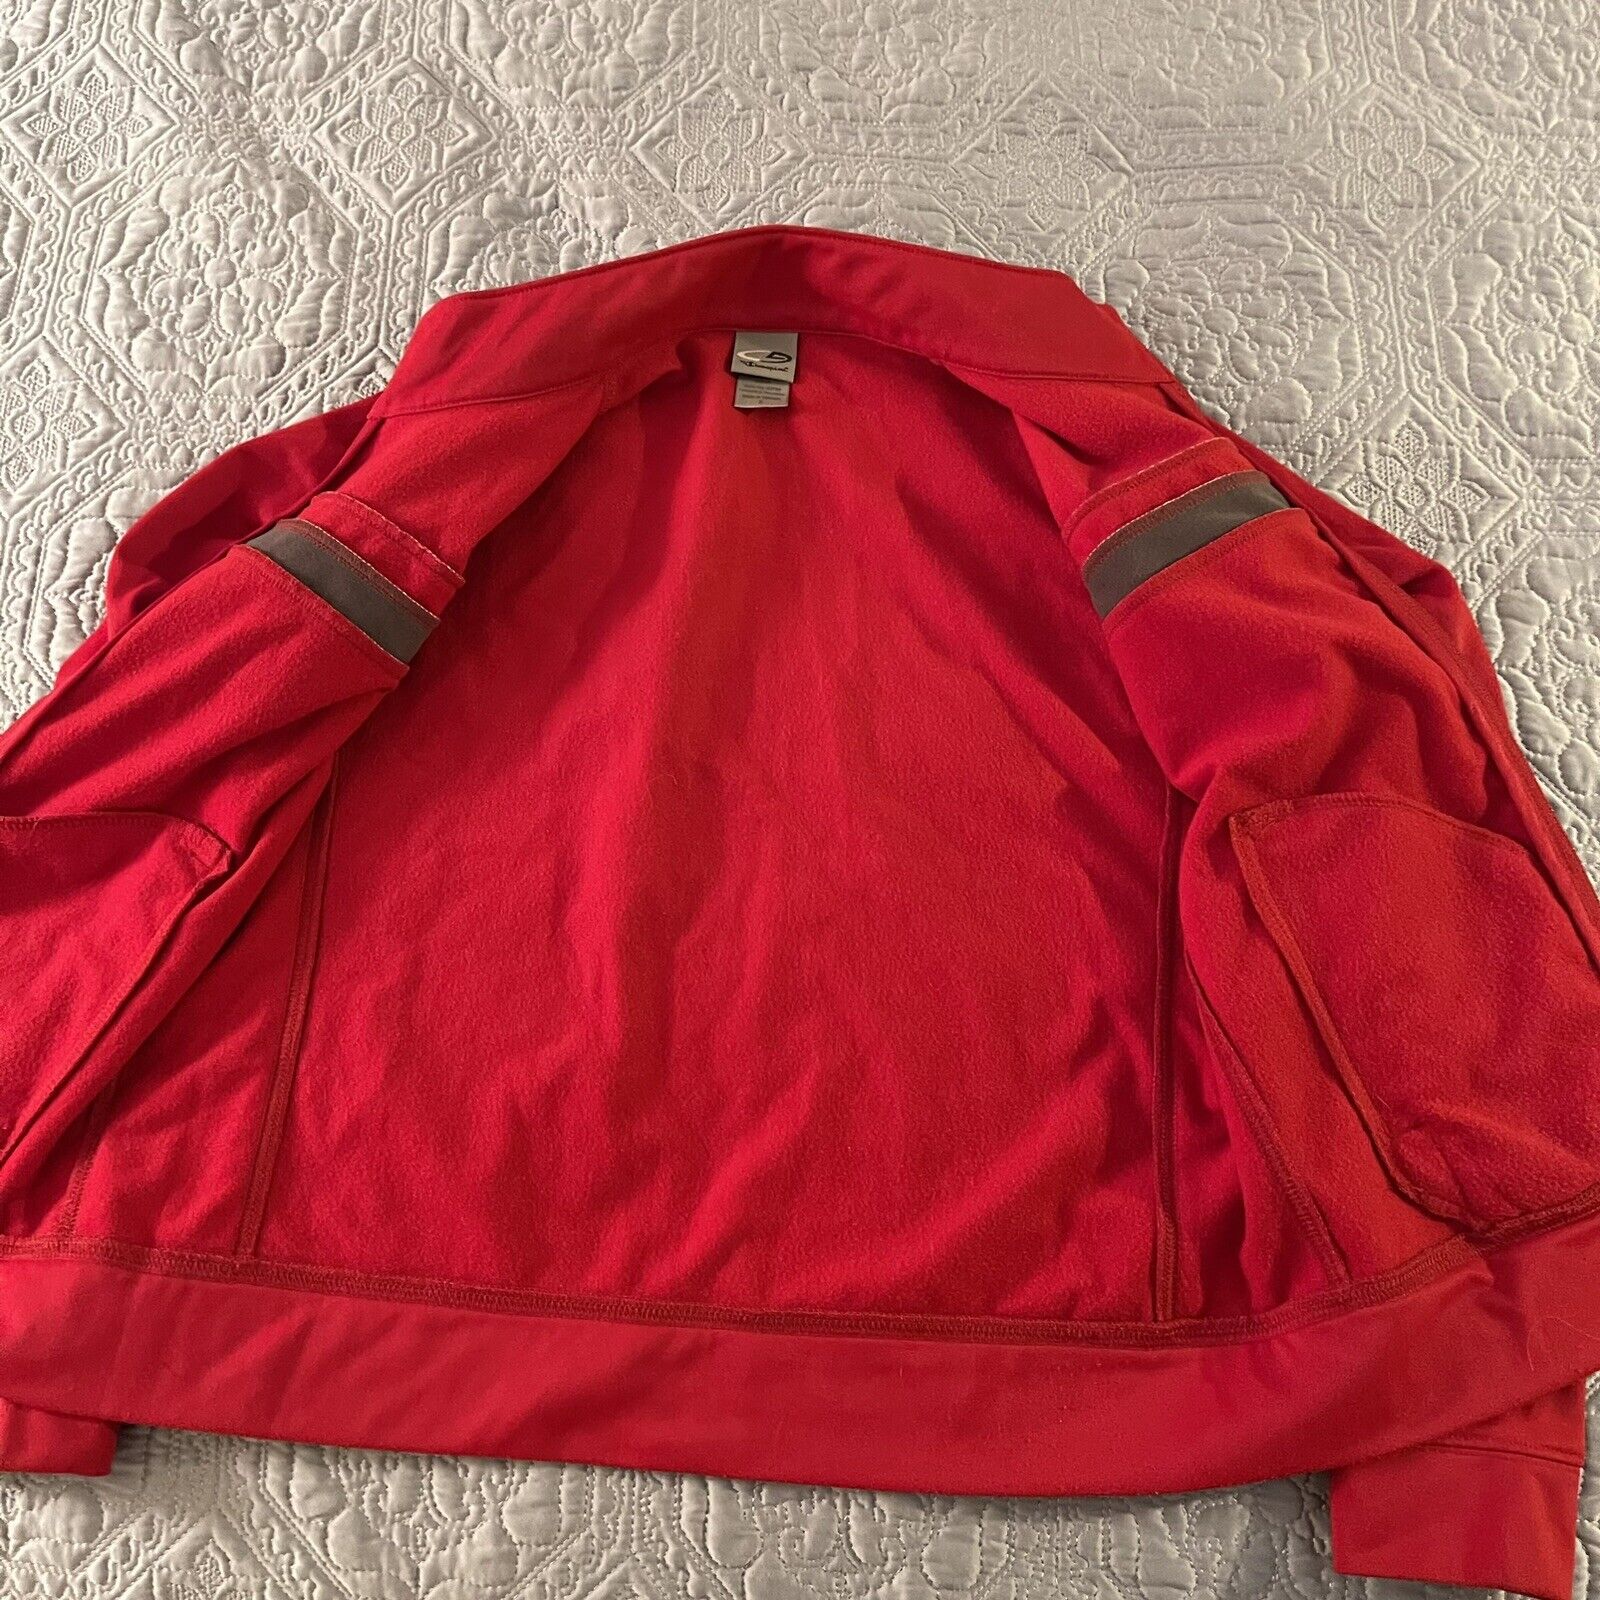 Vintage CHAMPION Red Full Zip Jacket Size Small - image 3